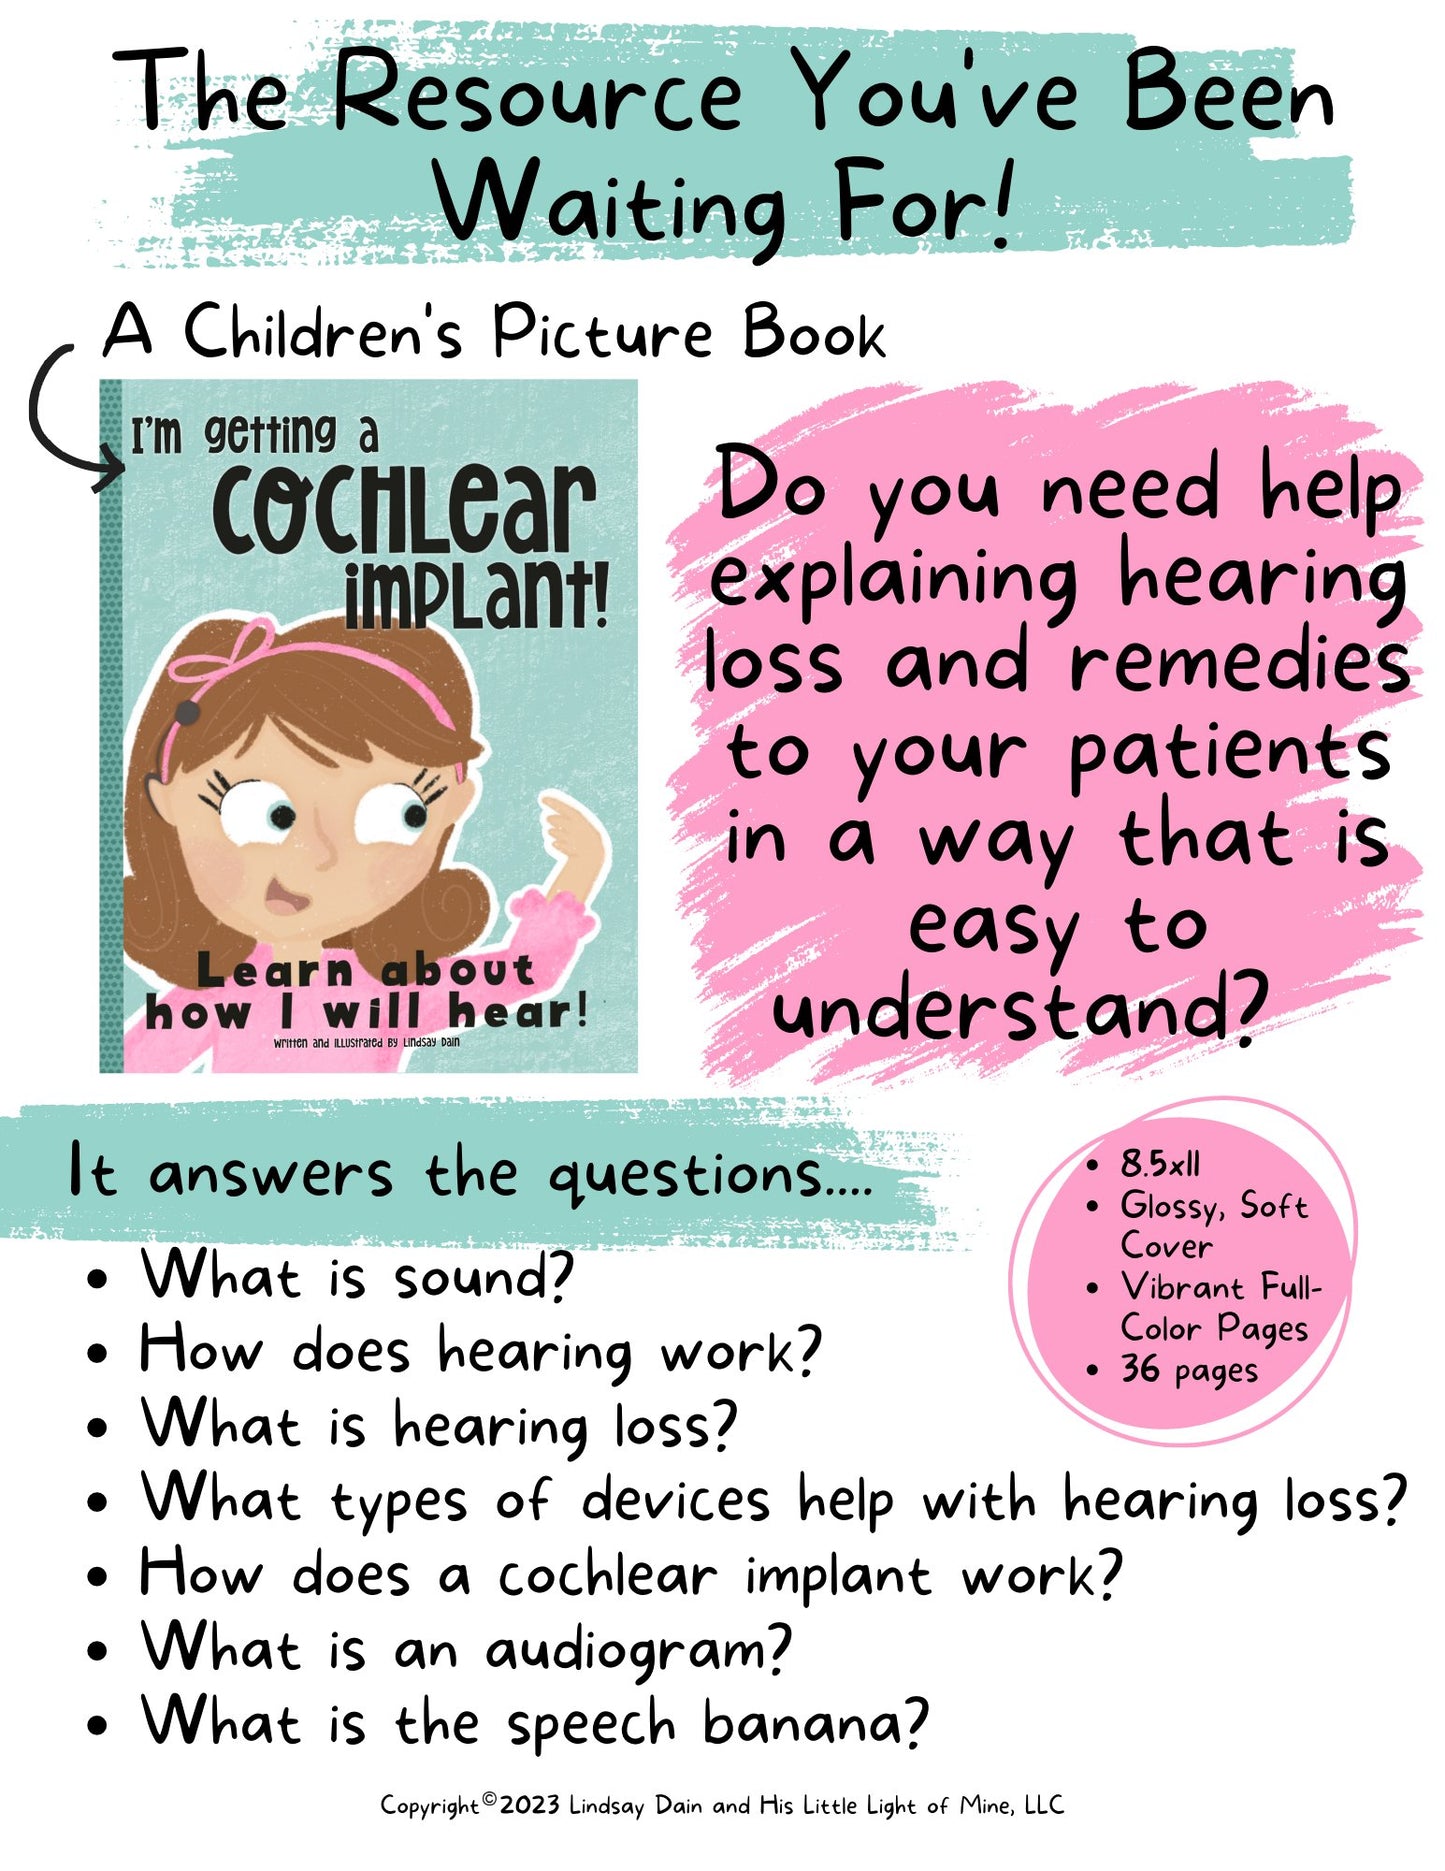 Bulk ad of a self-published cochlear implant children’s picture book about hearing and hearing loss created through Amazon Kindle Direct Publishing a new resource